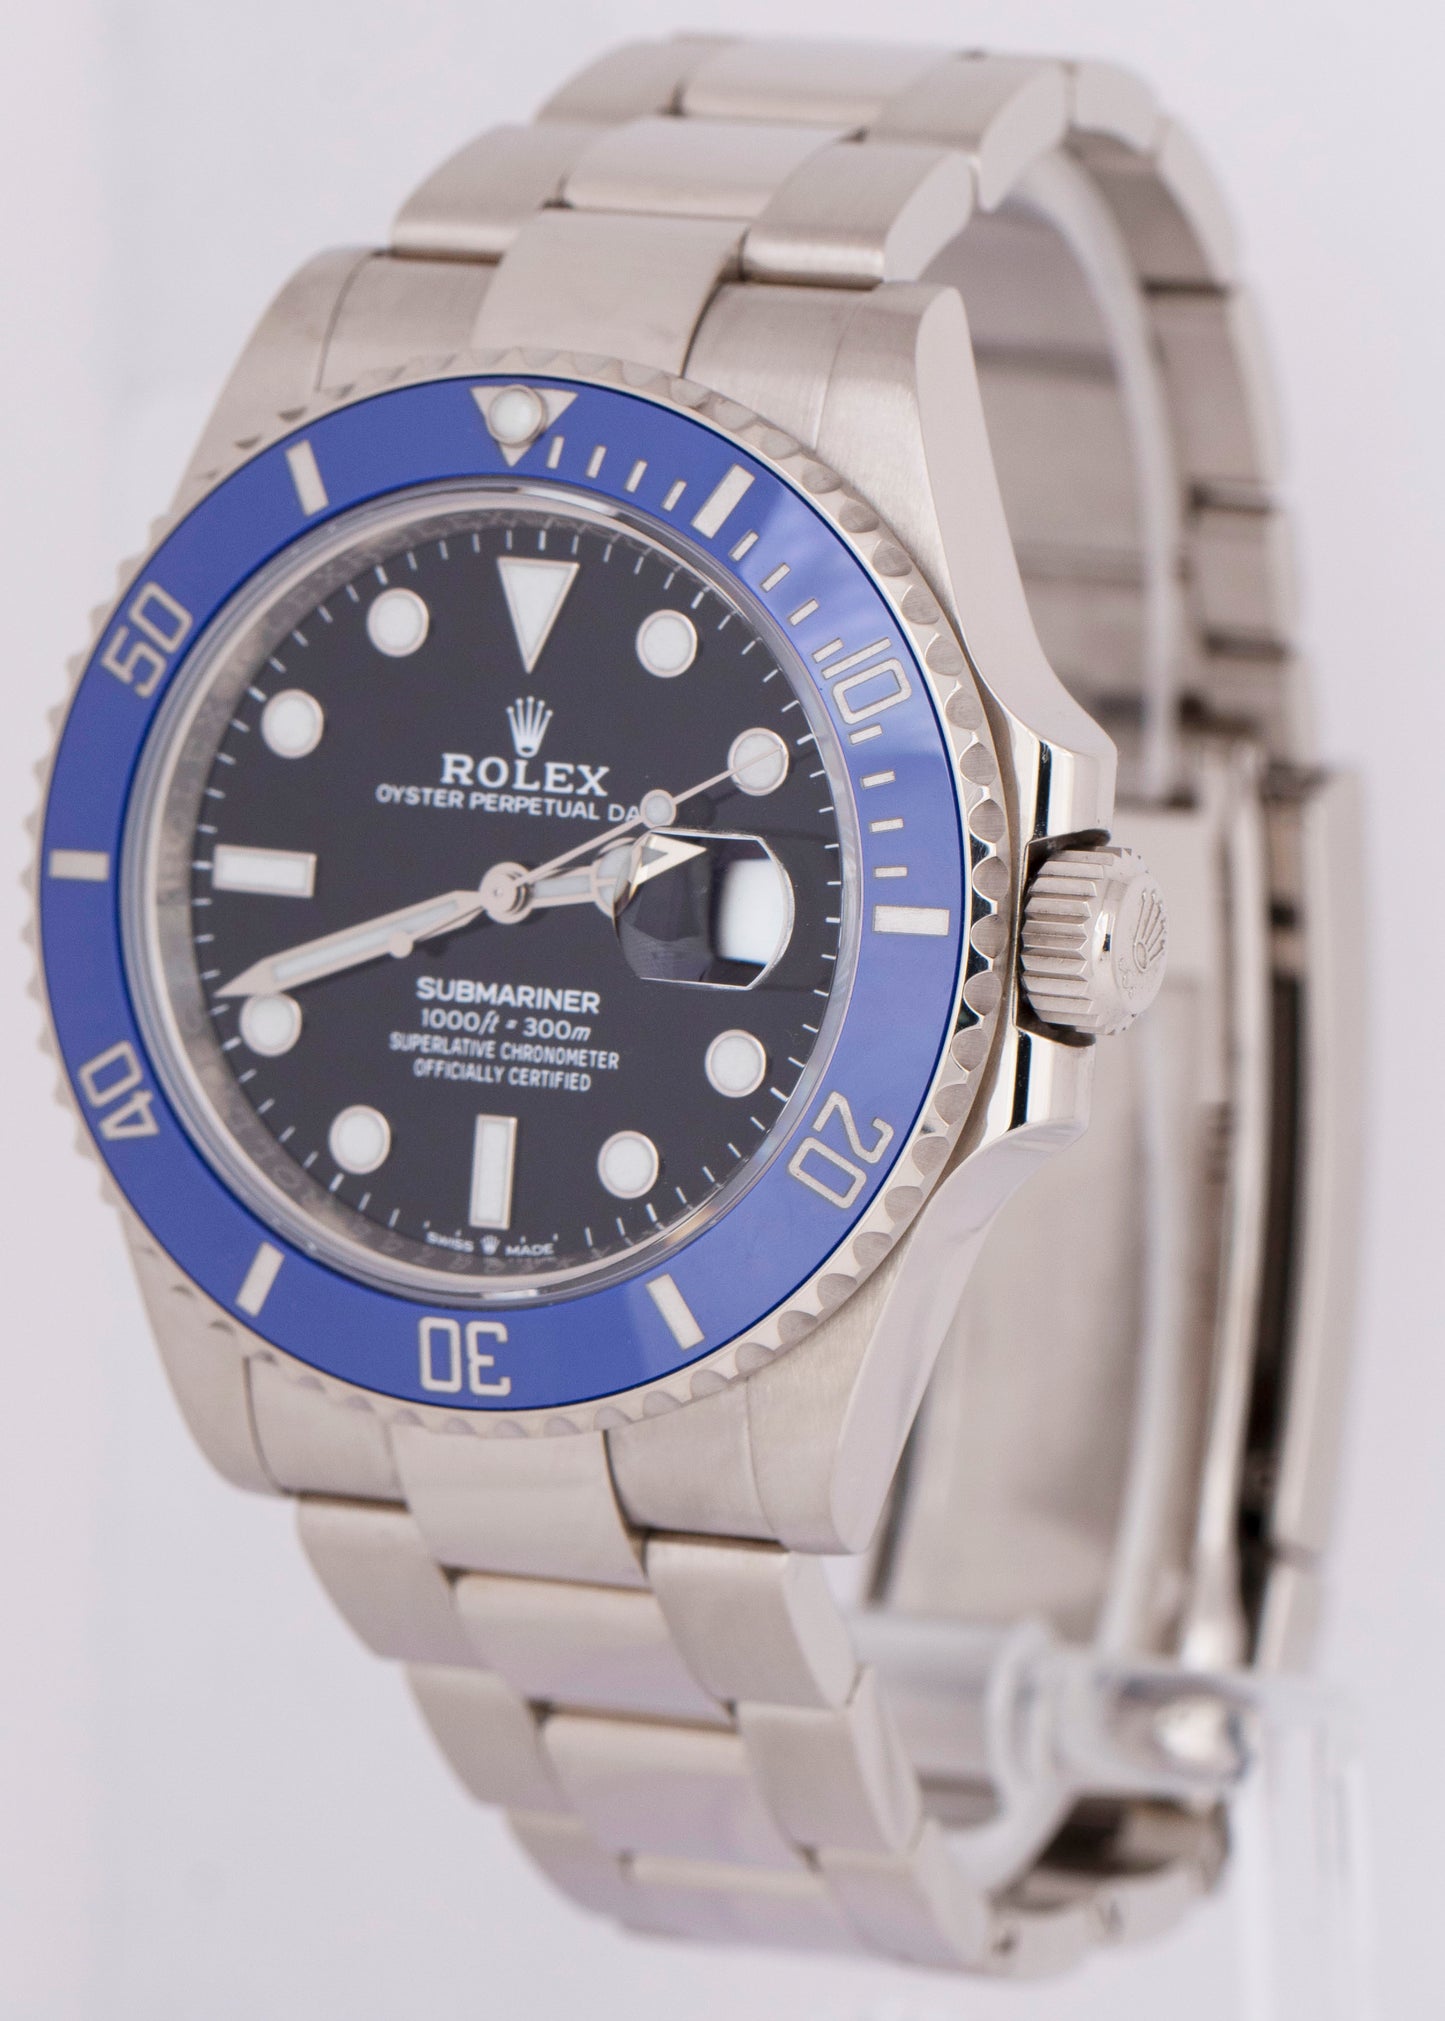 Rolex Submariner Date PAPERS 41 BLUEBERRY 18K White Gold Blue 126619 LB B+P